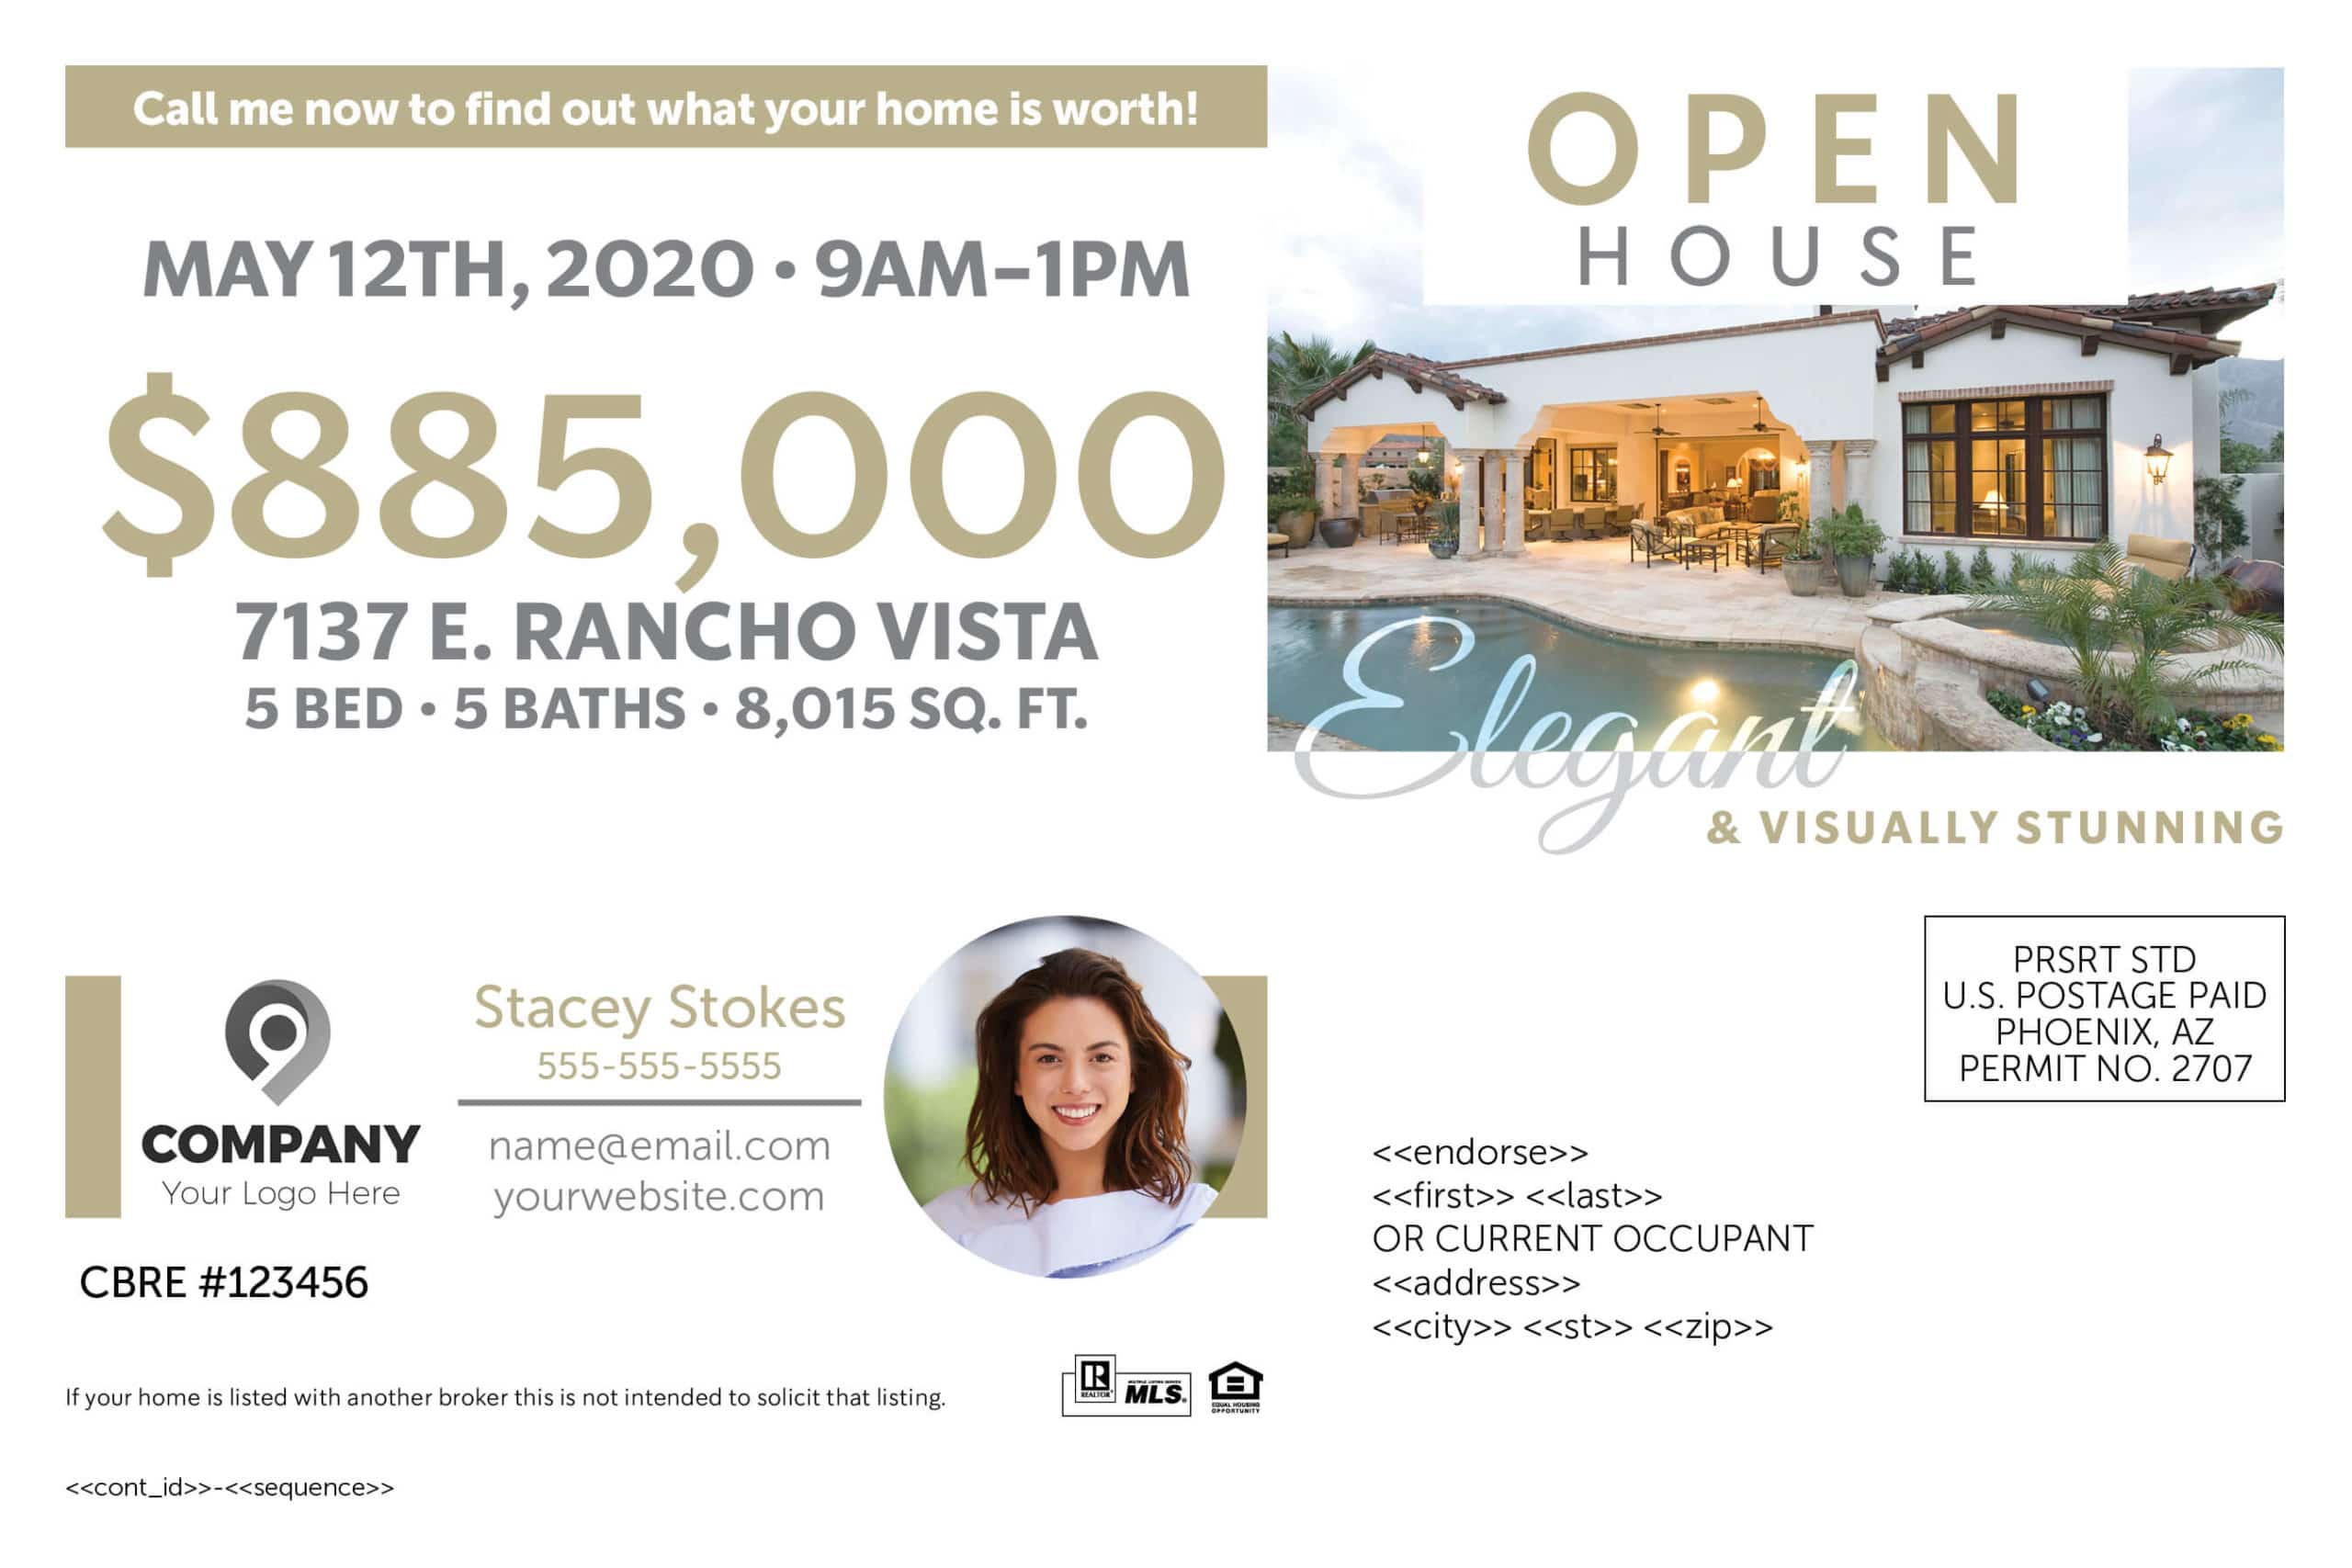 Open House Postcard Templates by Wise Pelican With Open House Postcard Template